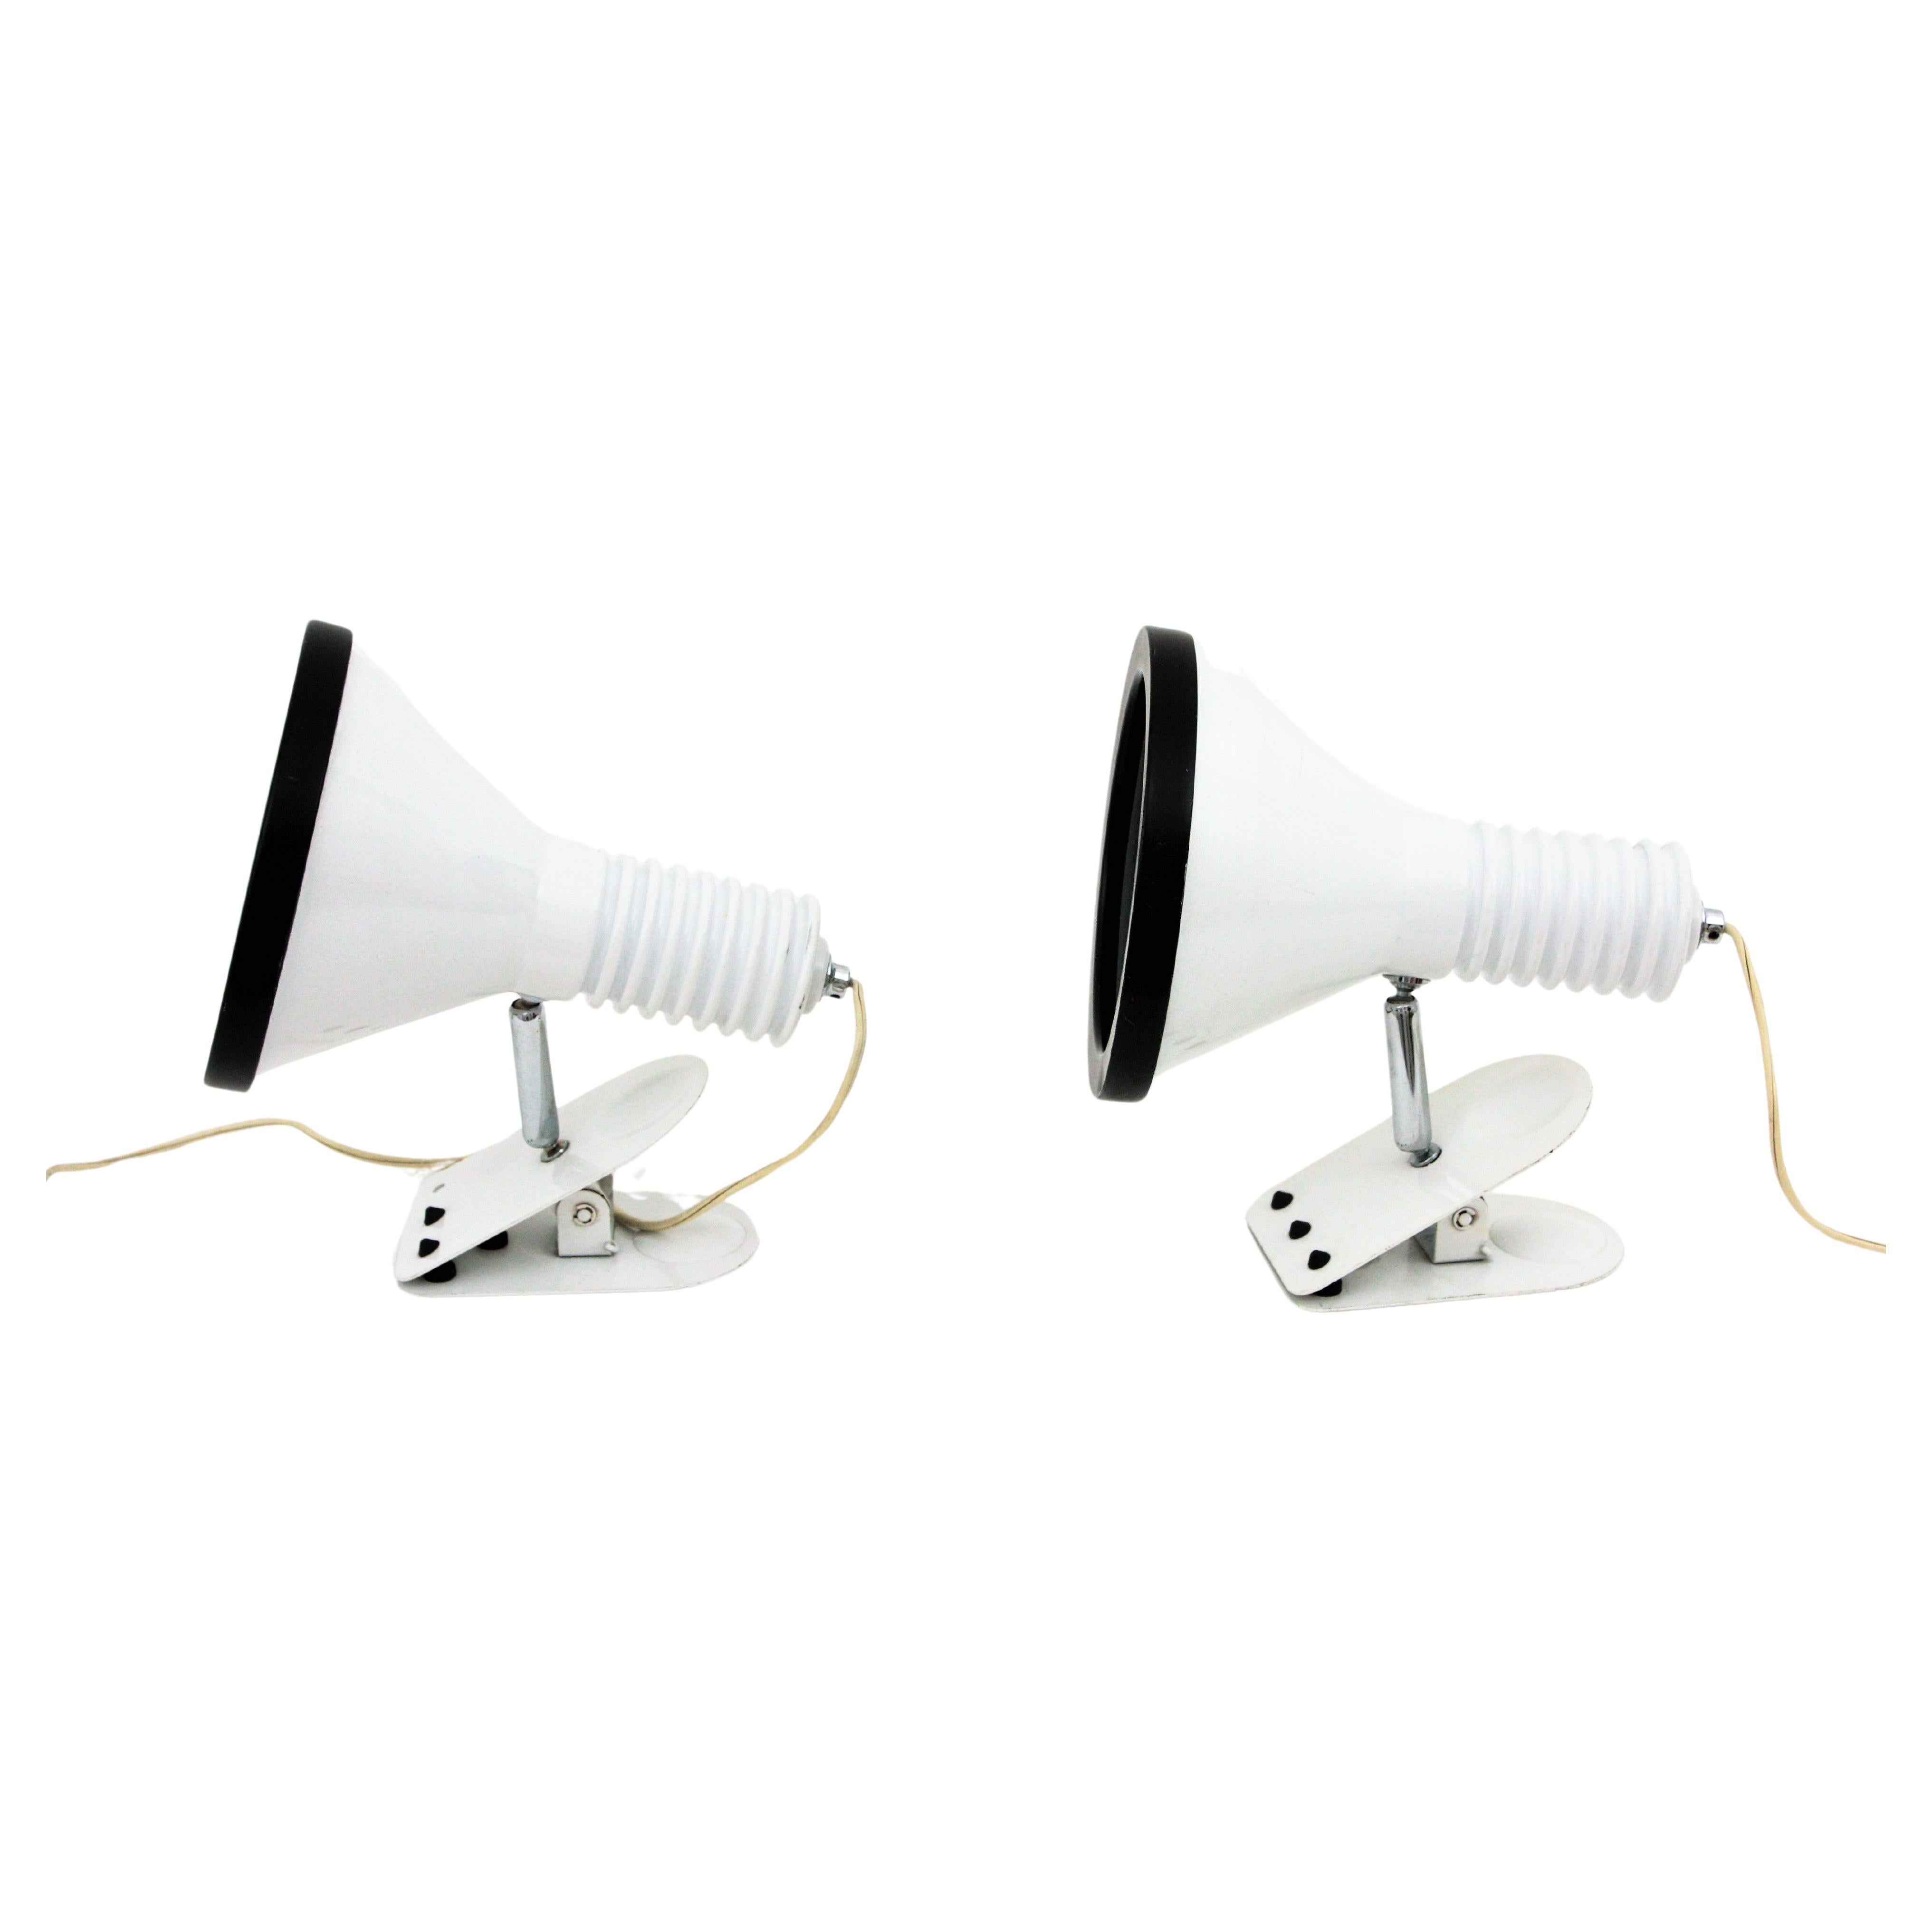 Pair of clamp wall or table light.
Miguel Milá for TRAMO
Spain, 1970s
White lacquered metal with black accents on the frontal part.
The lampshade swivels on the clamp allowing rotation and different positions.
Original wiring tested in working